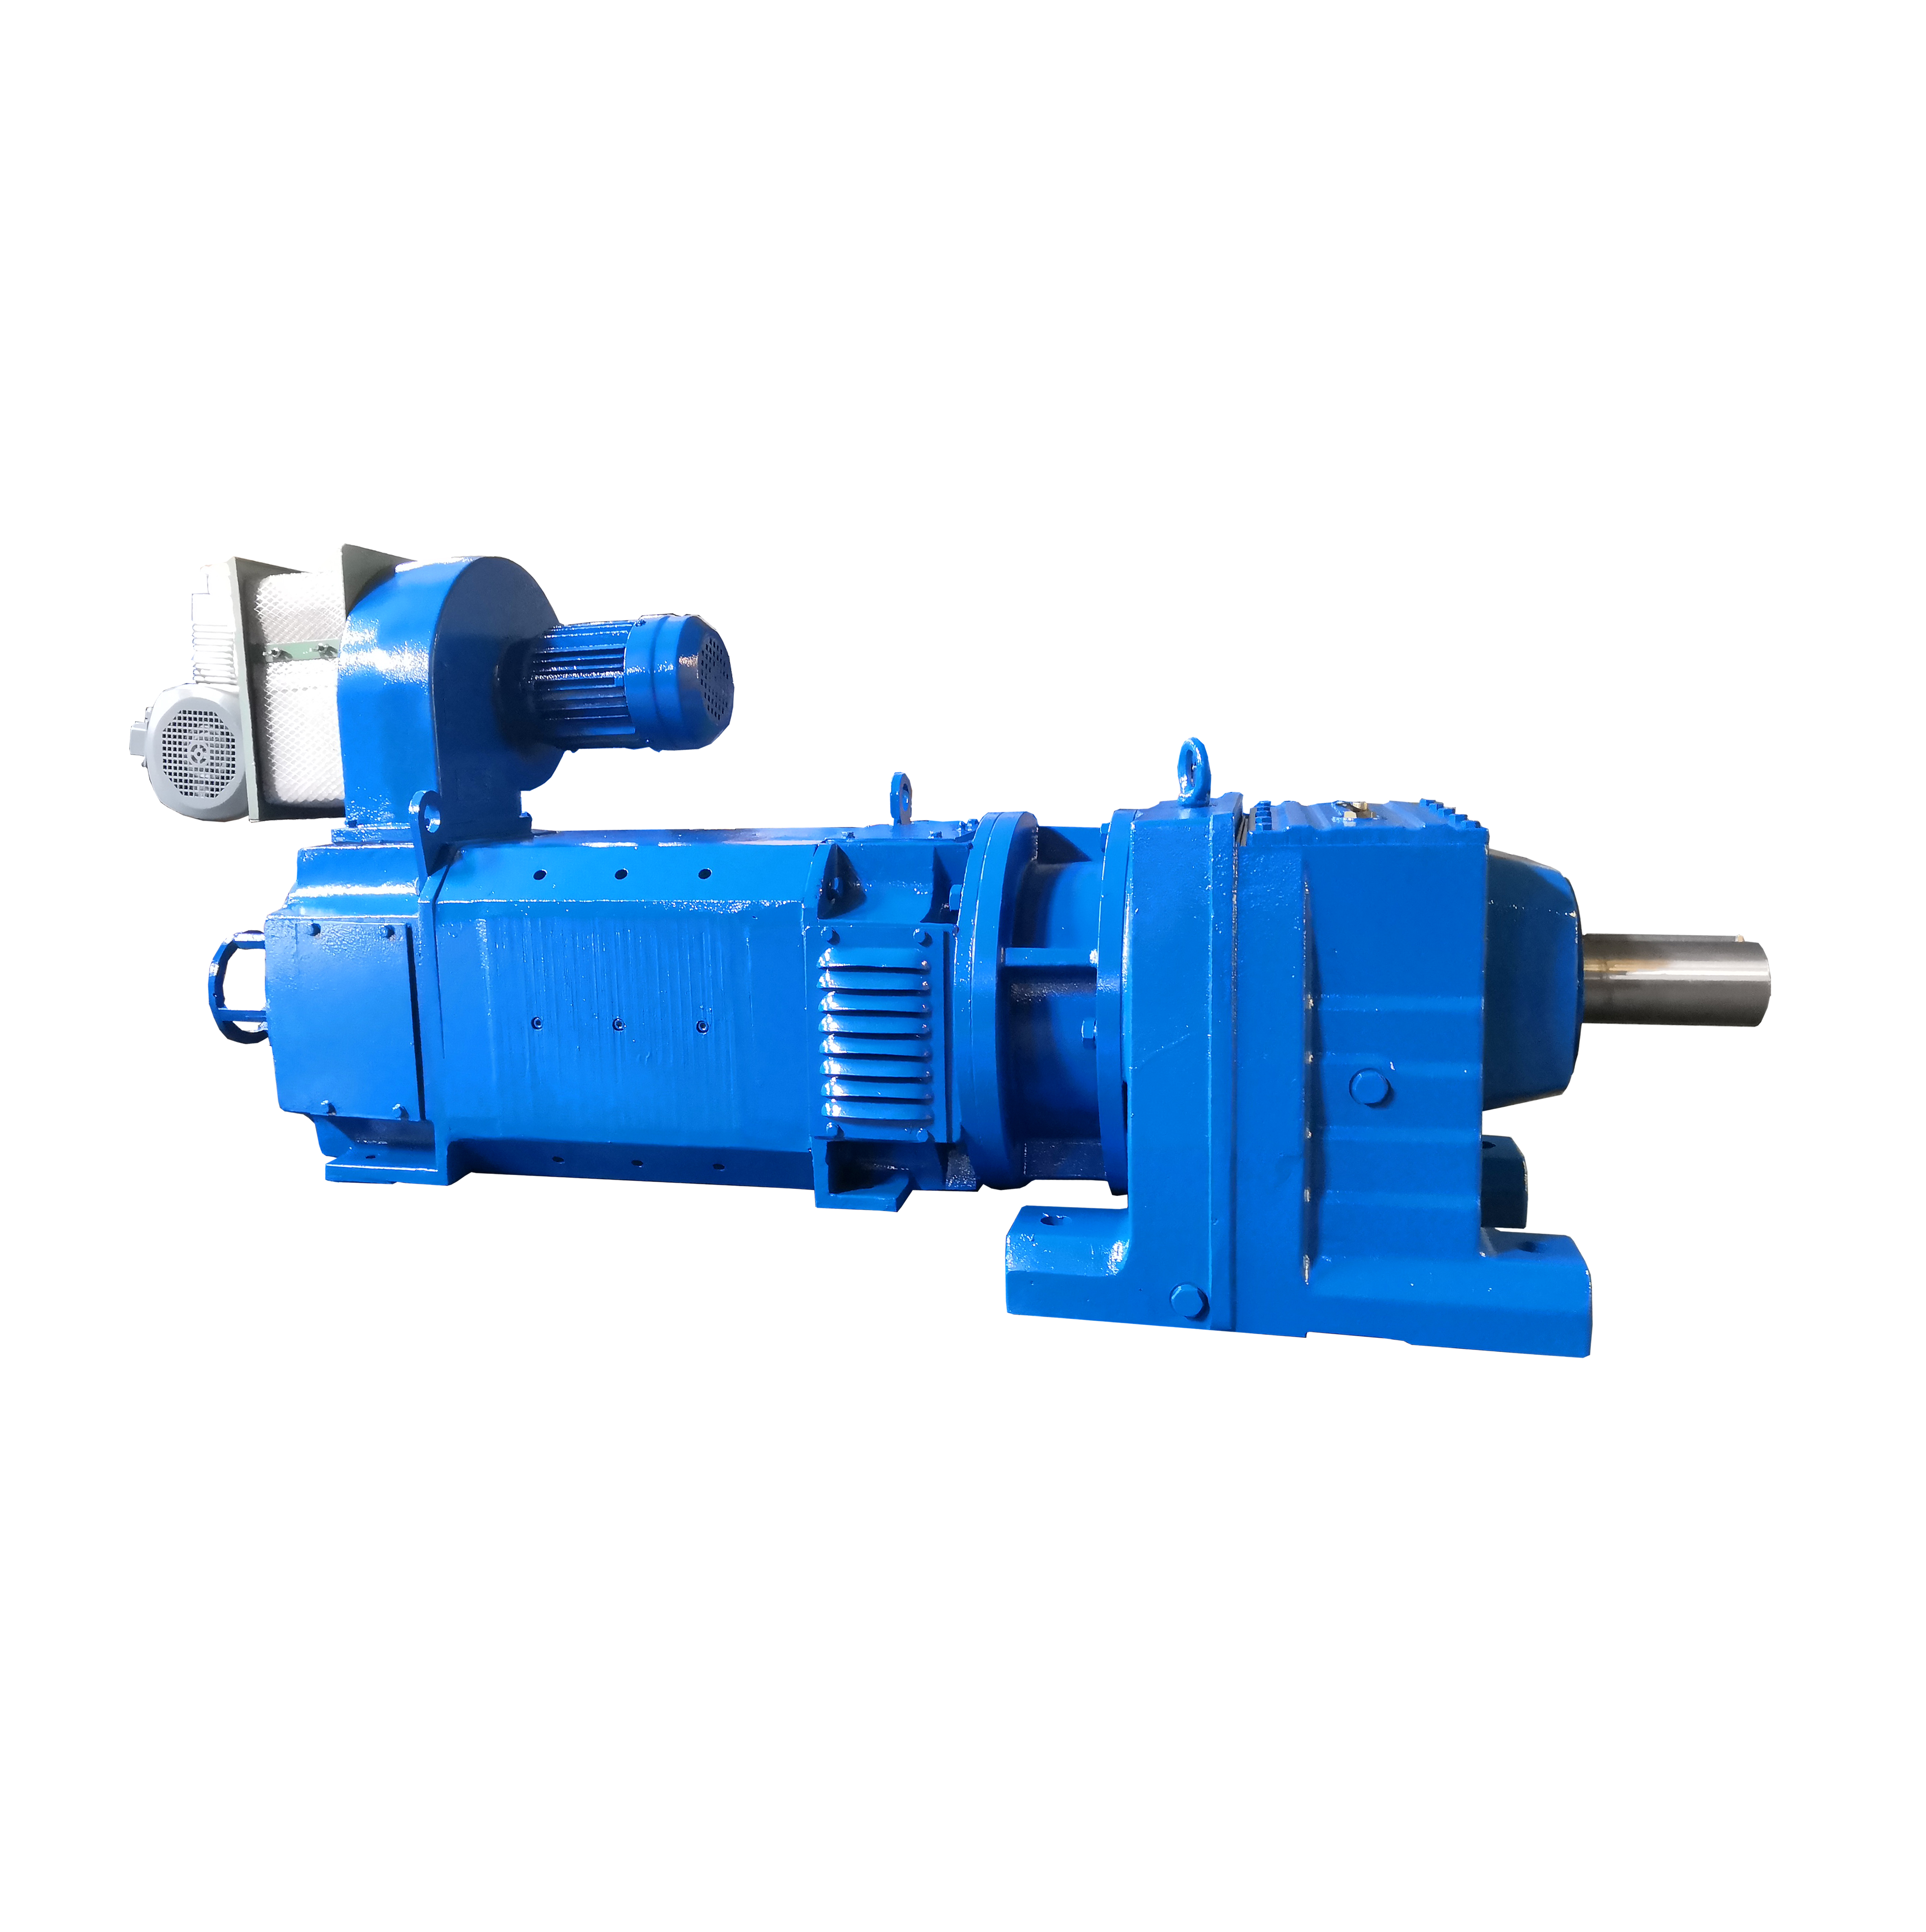 EVERGEAR DRIVE Inline shaft 3 phase 30 rpm ac gear motor speed gearbox R series coaxial reducer